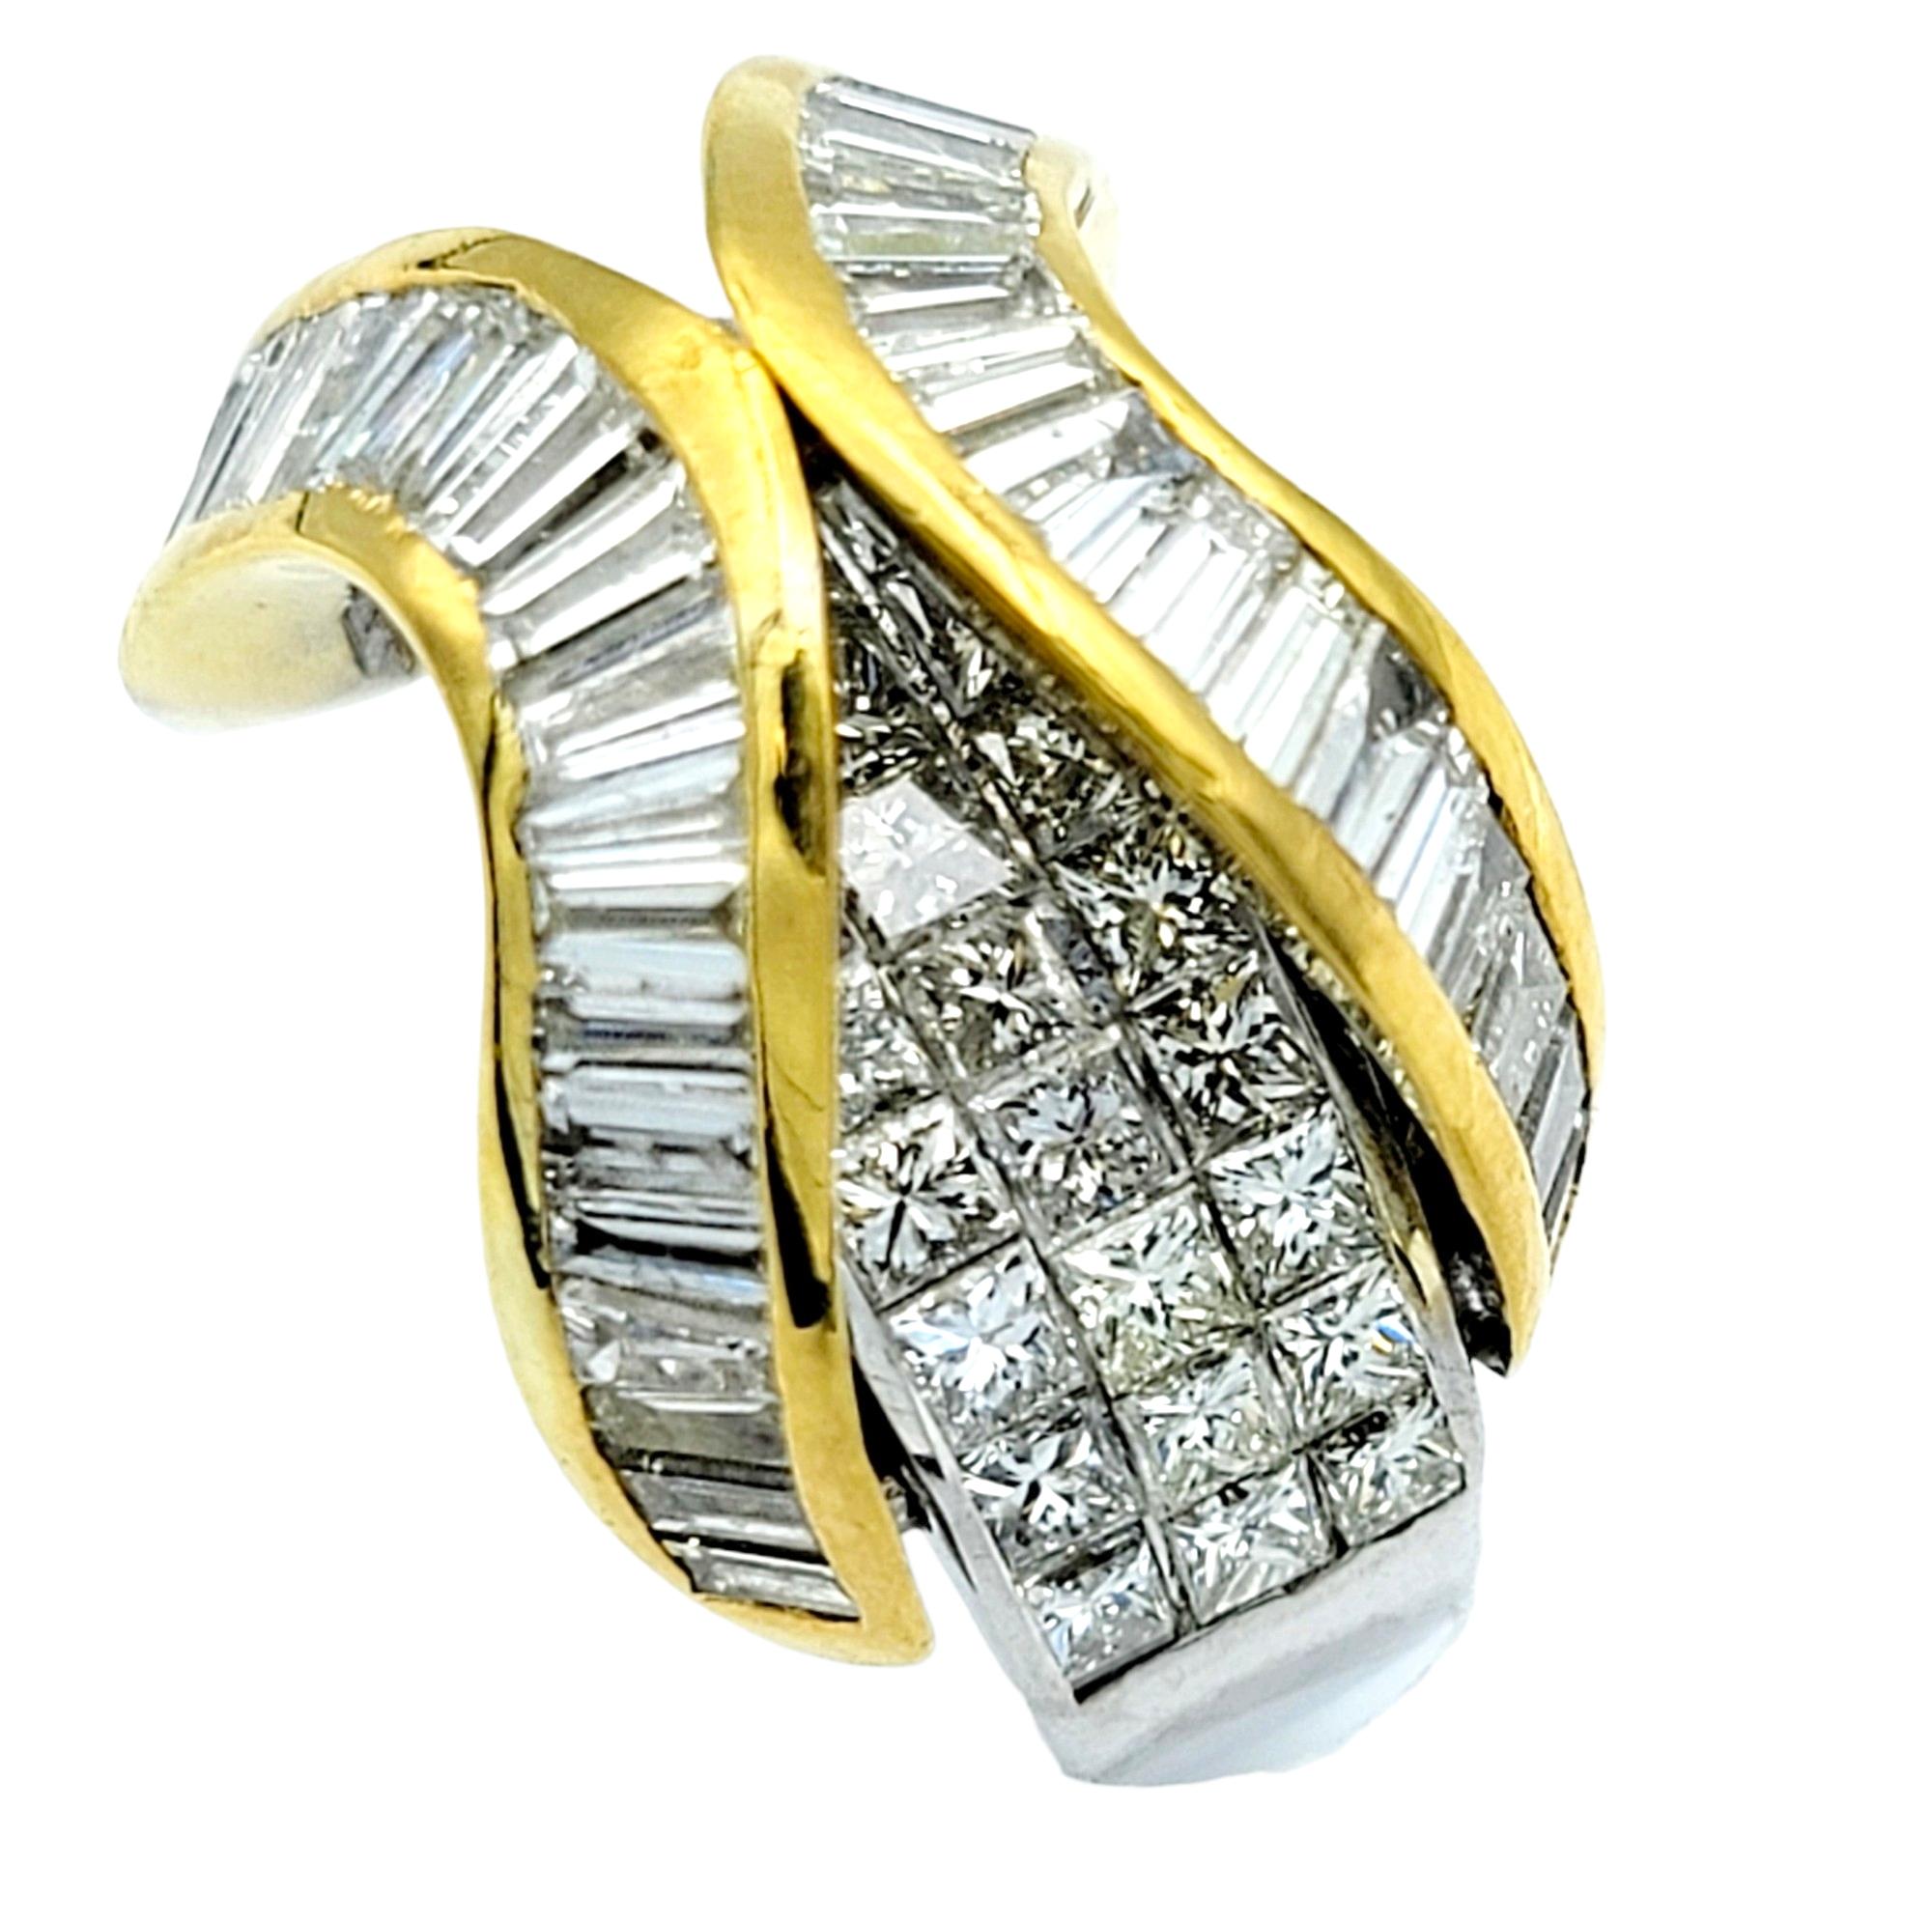 Ring size: 5

Absolutely stunning contemporary diamond cocktail ring. This exquisite creation seamlessly marries the allure of princess cut and baguette cut diamonds, as well as luxurious white and yellow golds, resulting in a captivating